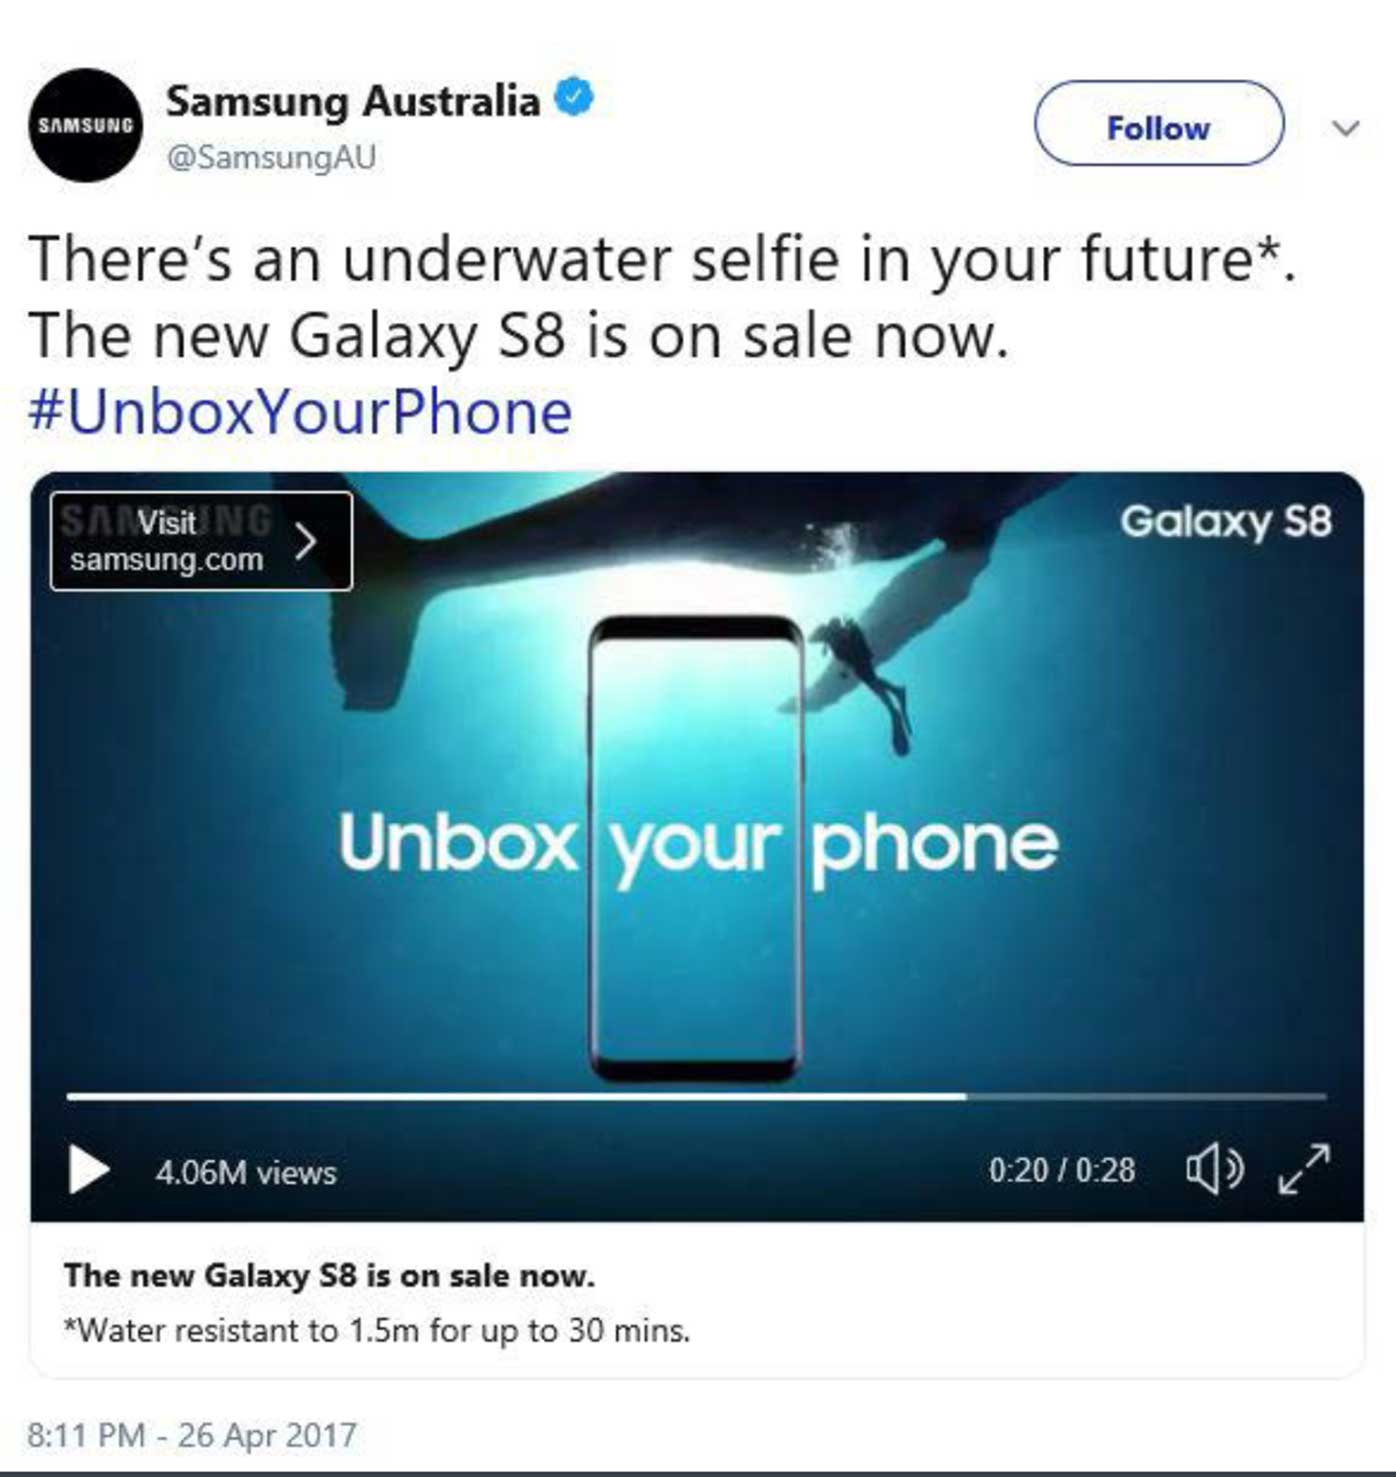 The ACCC received hundreds of complaints over Samsung's misleading advertising.